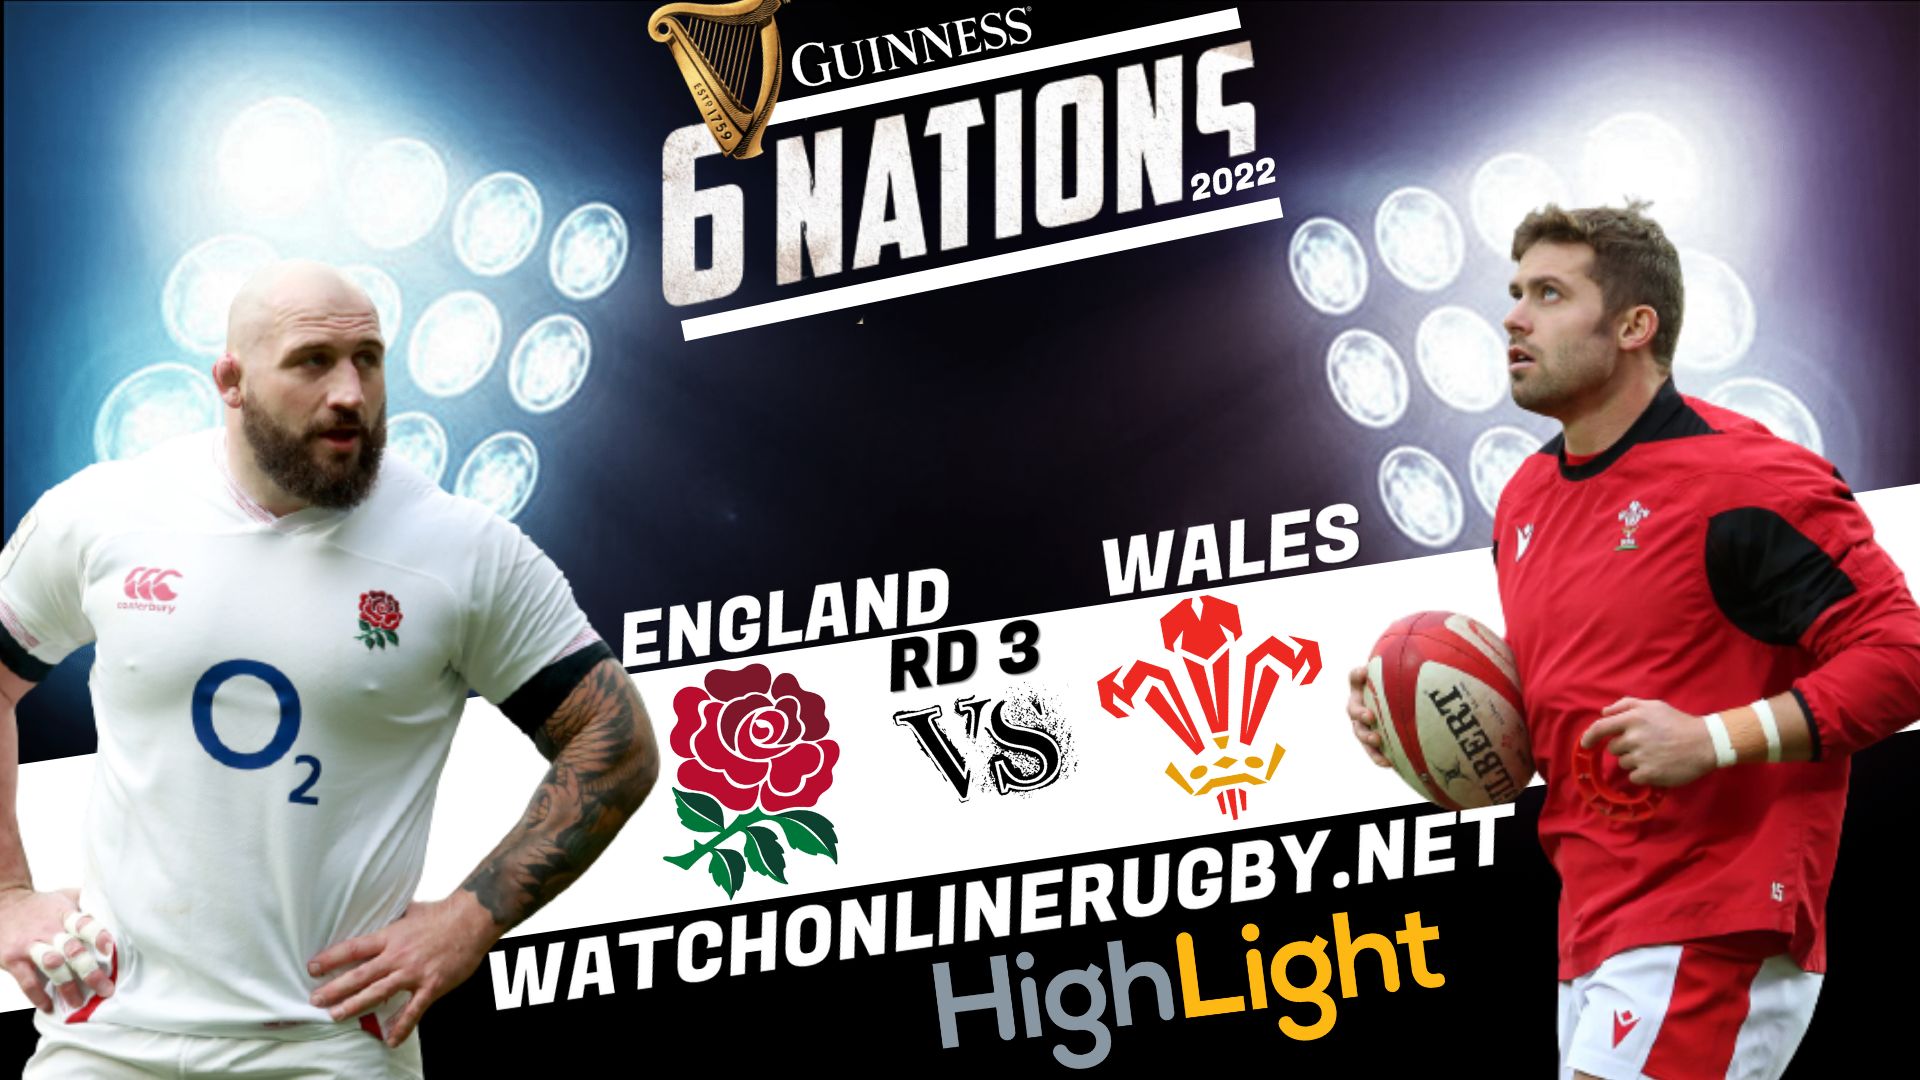 England Vs Wales Six Nation Rugby 2022 RD 3